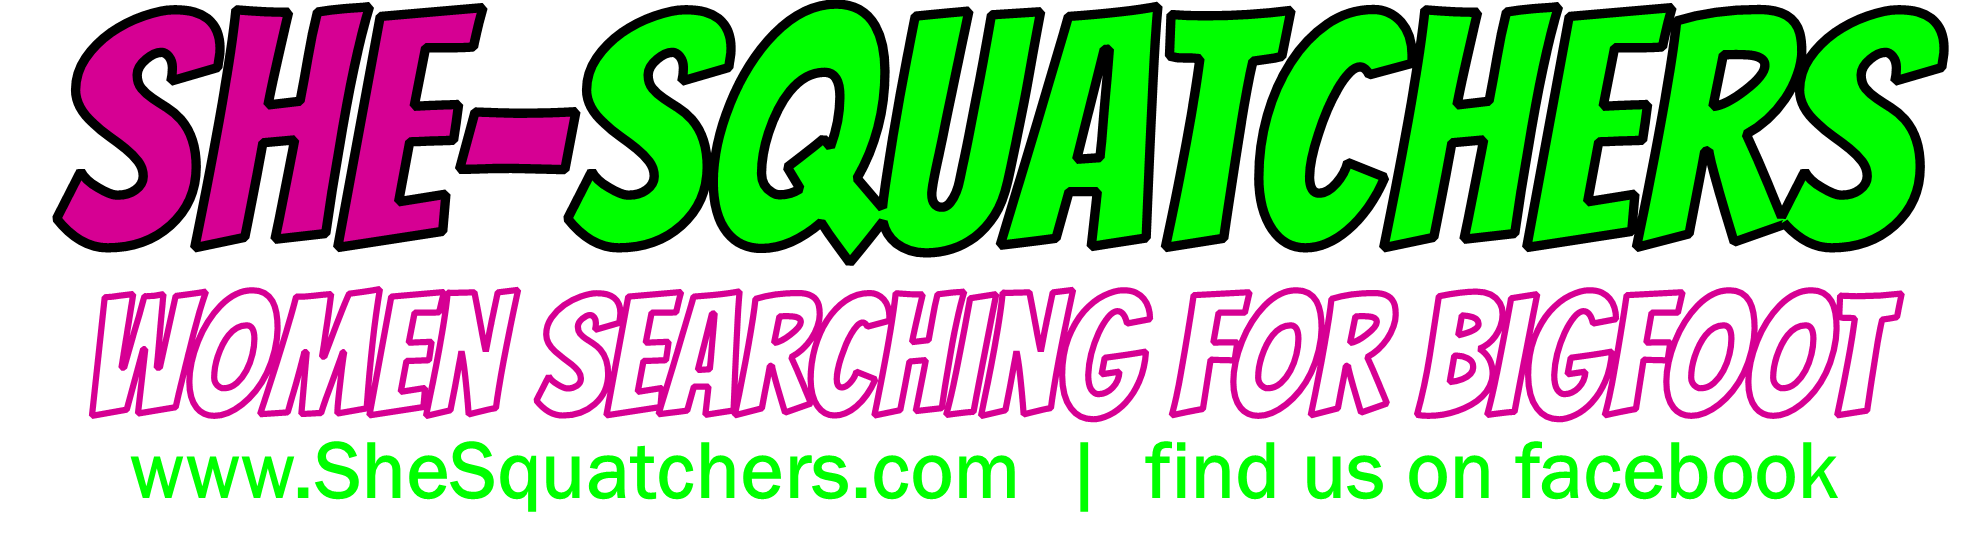 She-Squatchers Spooky Halloween & Bigfoot Chat - All Female Bigfoot Research Team - TheJourneyRadioShow.com